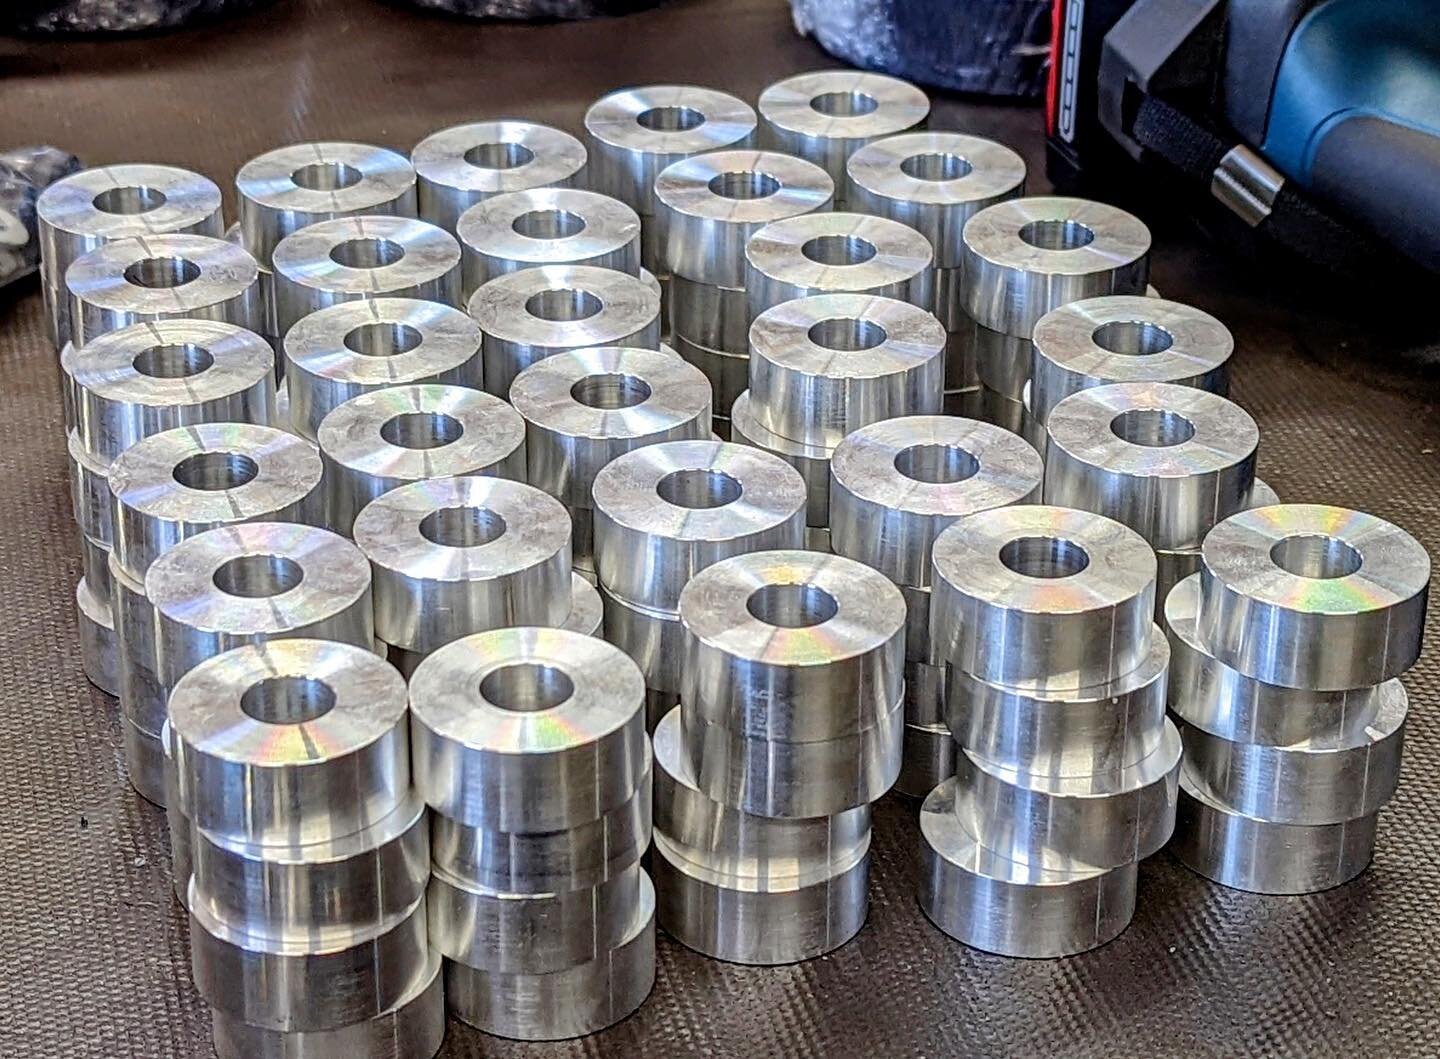 Freshly machined and ready for powder coat. We switched up manufacturing processes to keep these pieces as cost effective as possible. KL Cherokee trailing link spacers (elsewhere know as rear wheel centering kit). Lathe turned 6061 aluminum, powder 